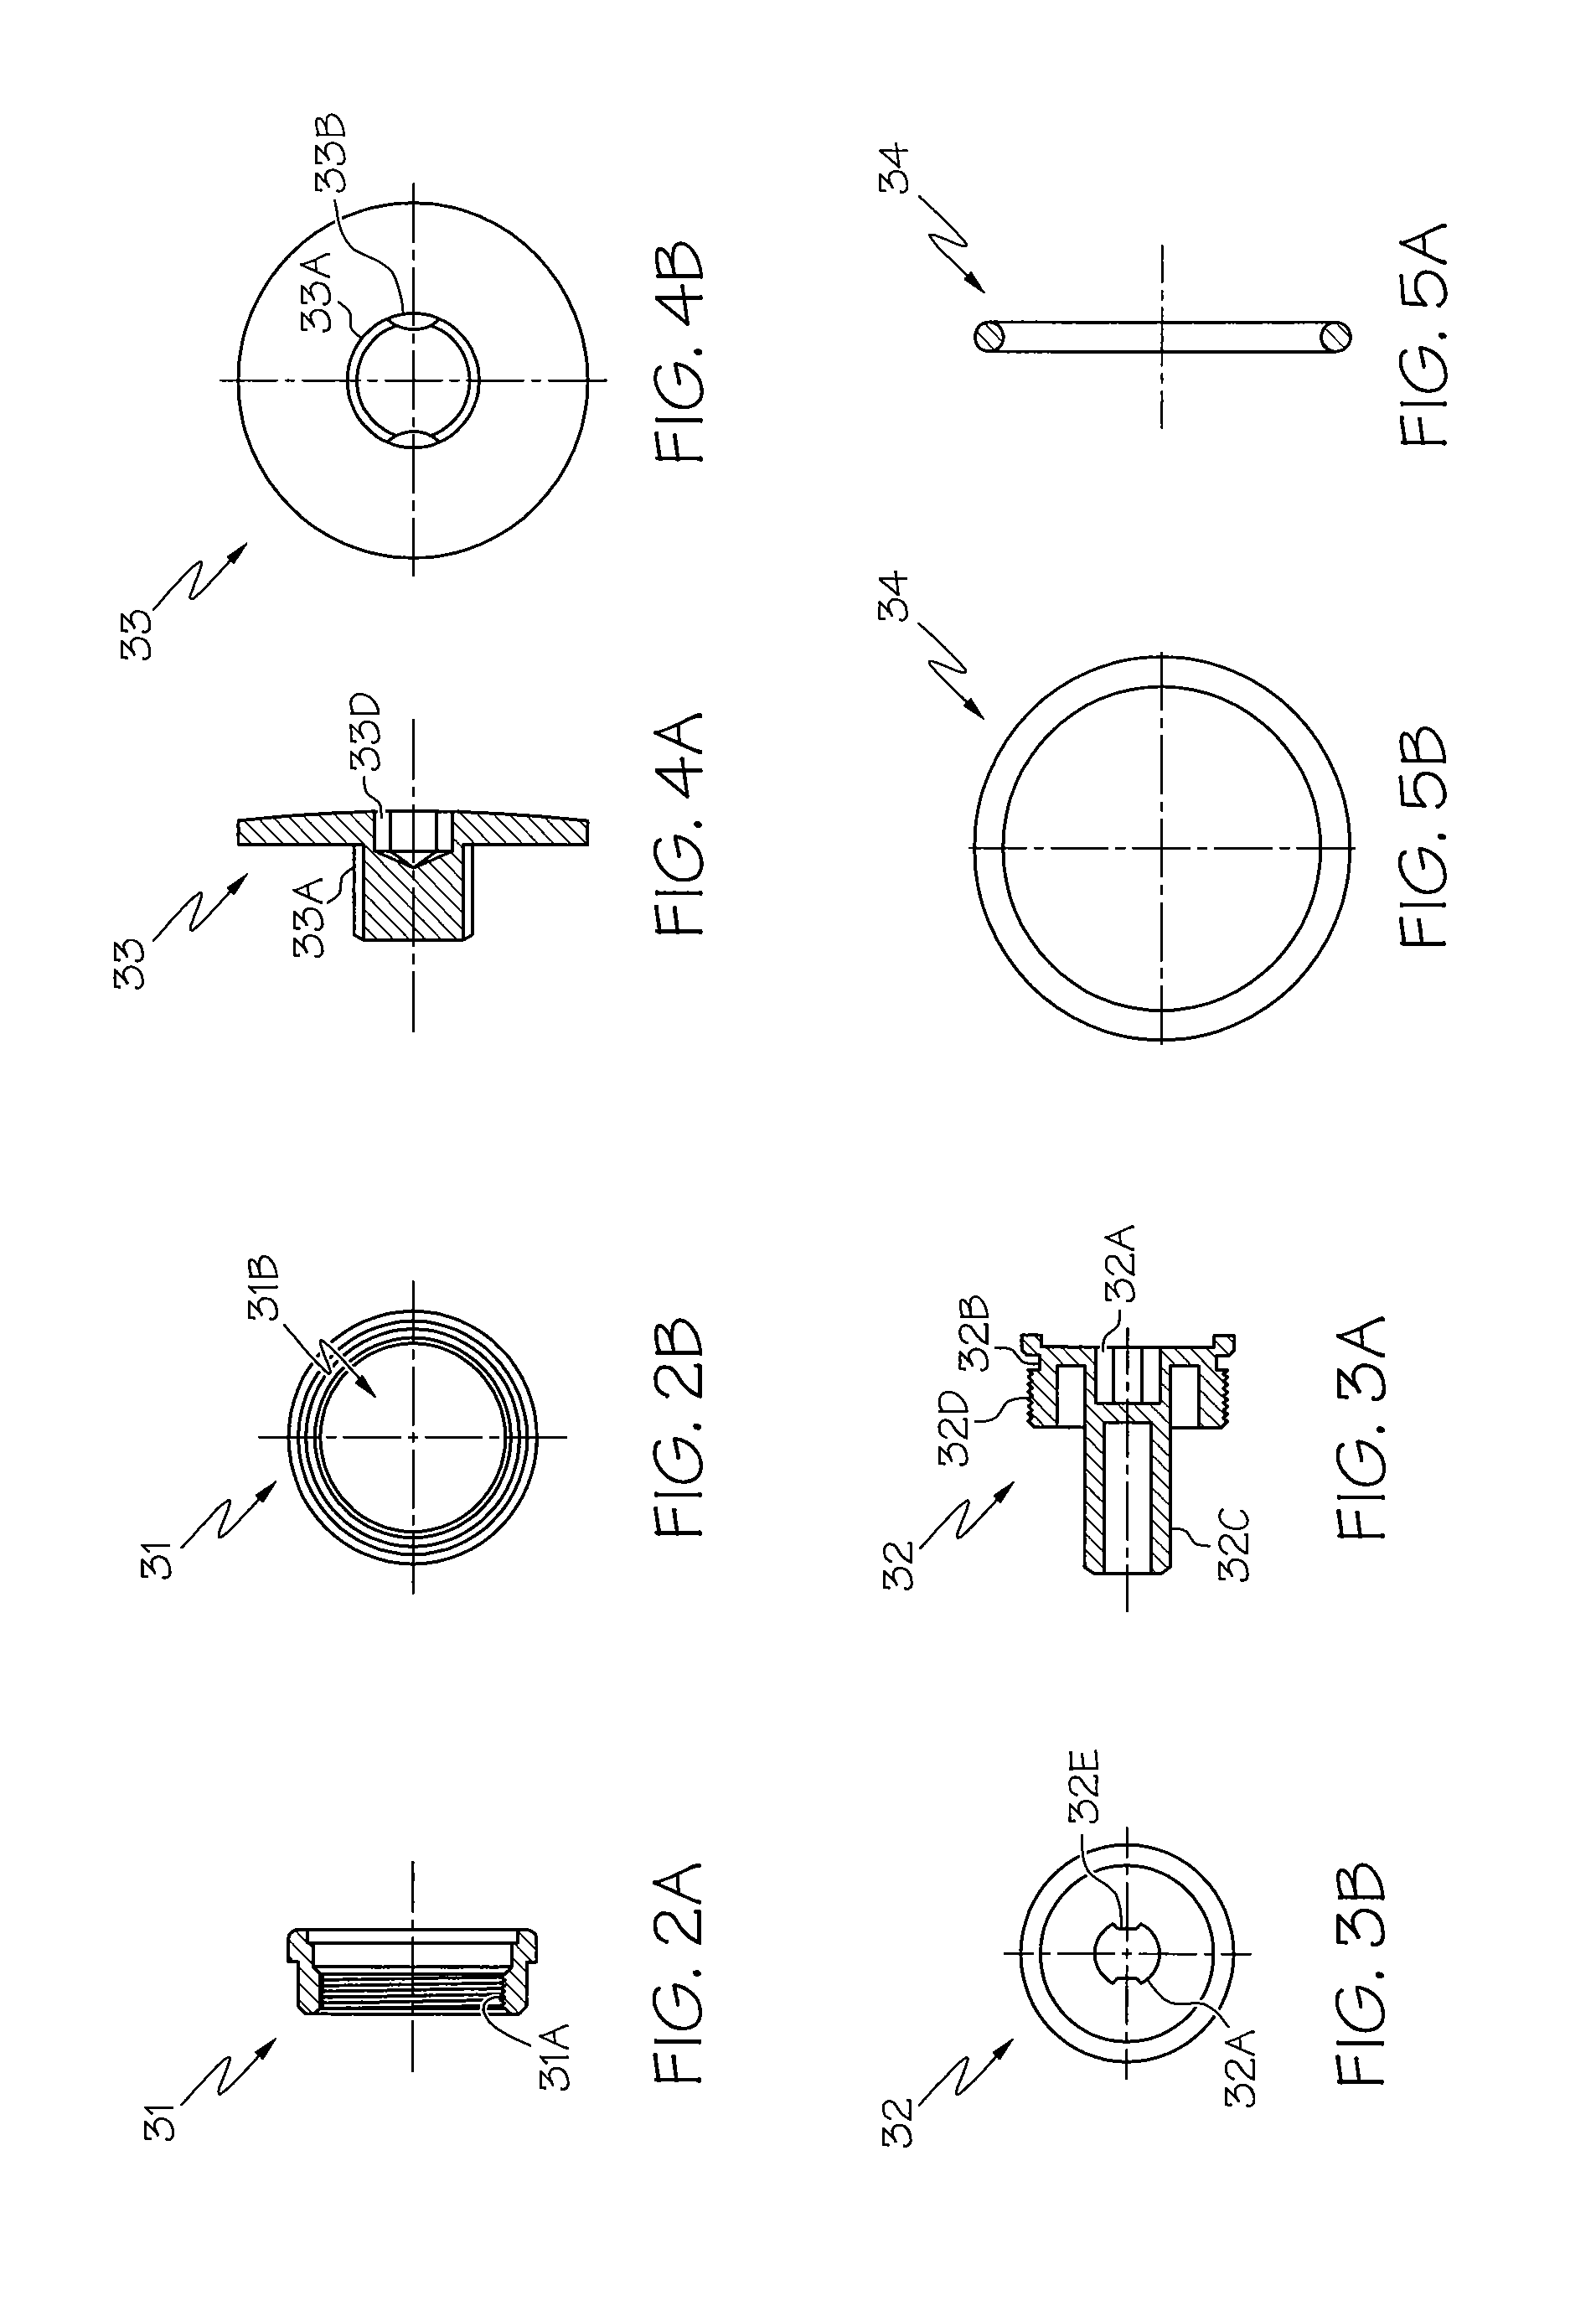 Method of balancing a kitchen knife using removable handle weights